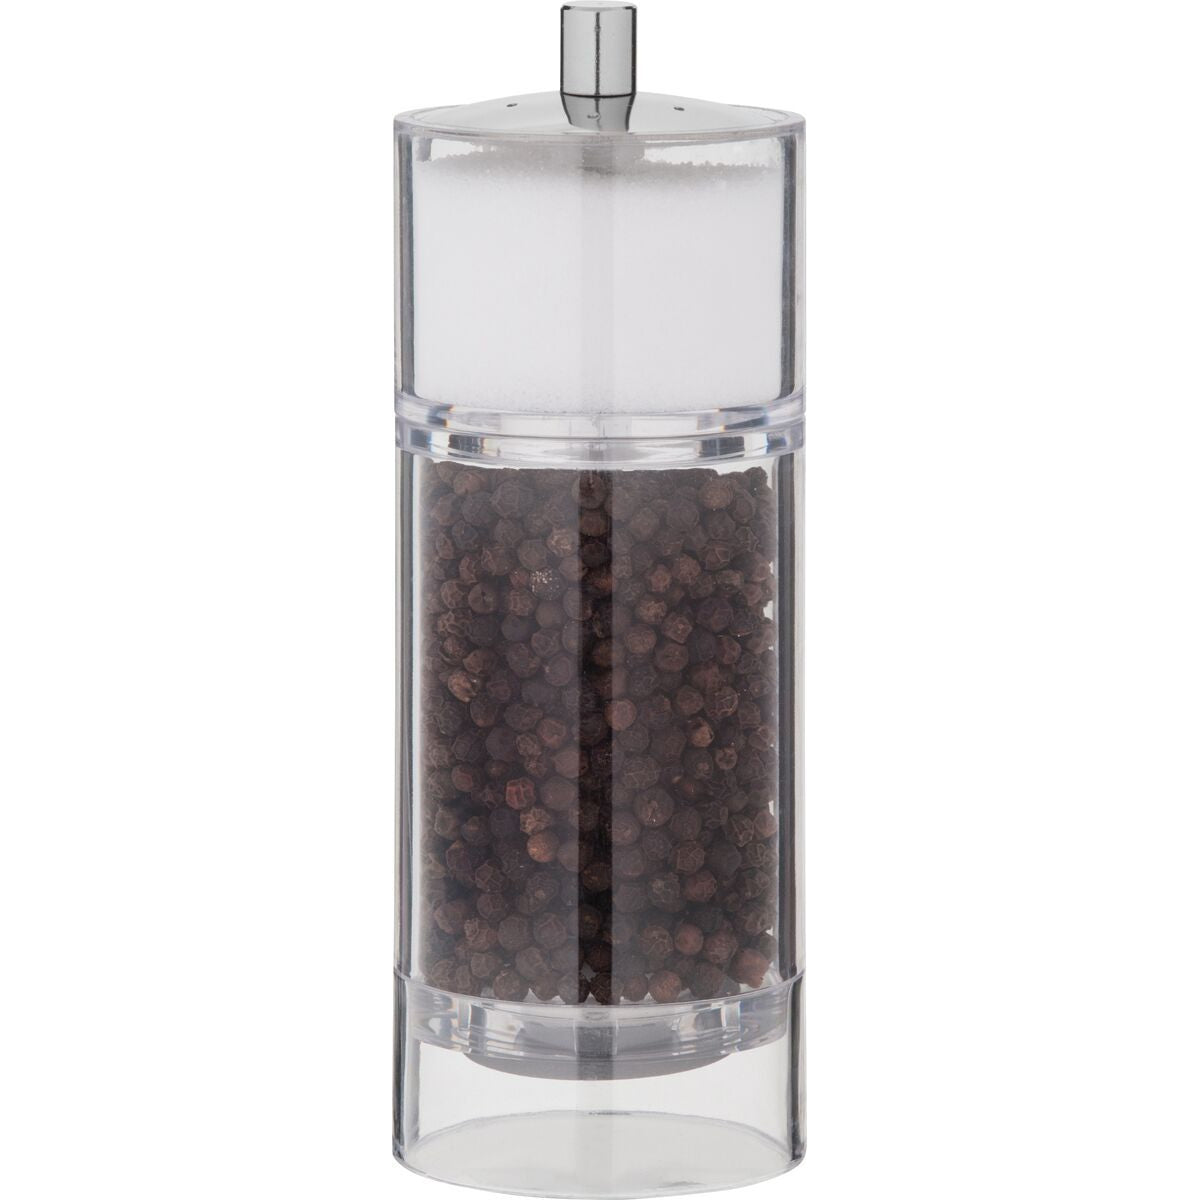 Trudeau Maison Plastic 2-in-1 Pepper Mill and Salt Shaker, Transparent | Kitchen Tools